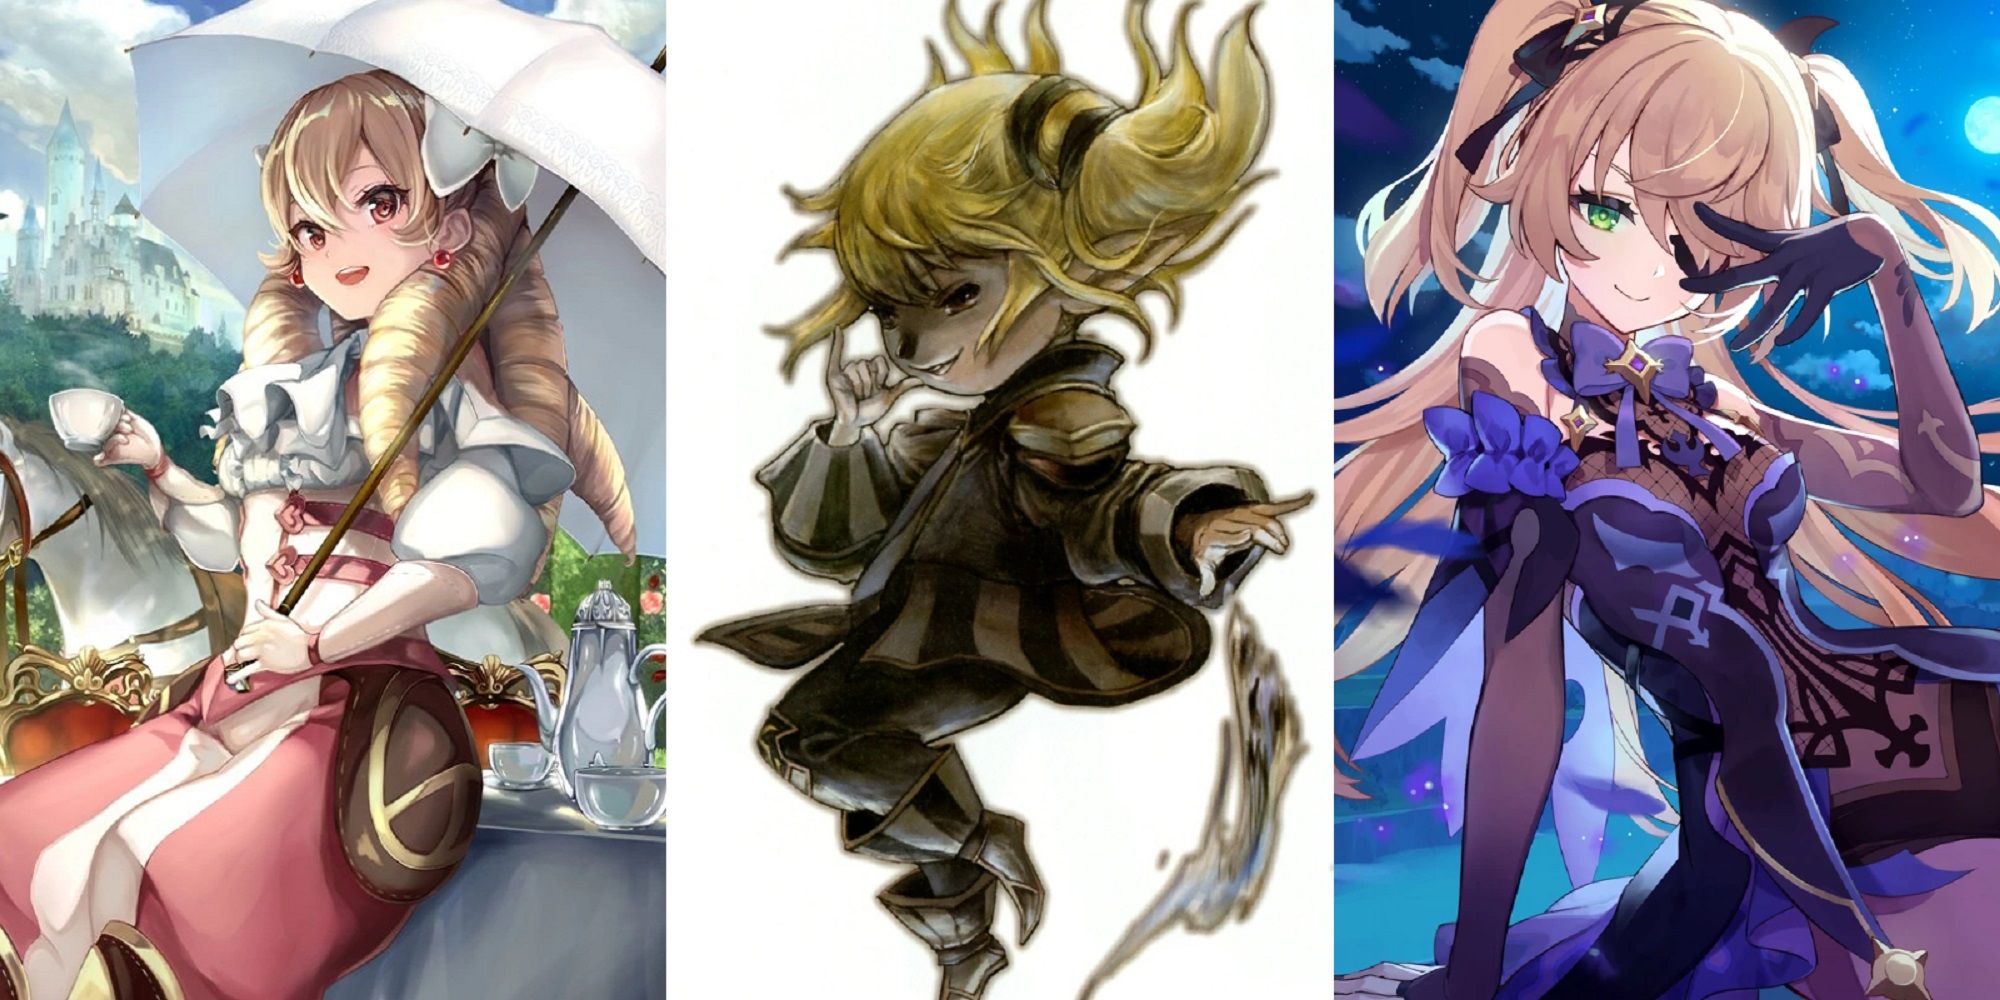 Official artwork of Maribelle from Fire Emblem Awakening, Shantotto from Final Fantasy 11, and Fischl from Genshin Impact